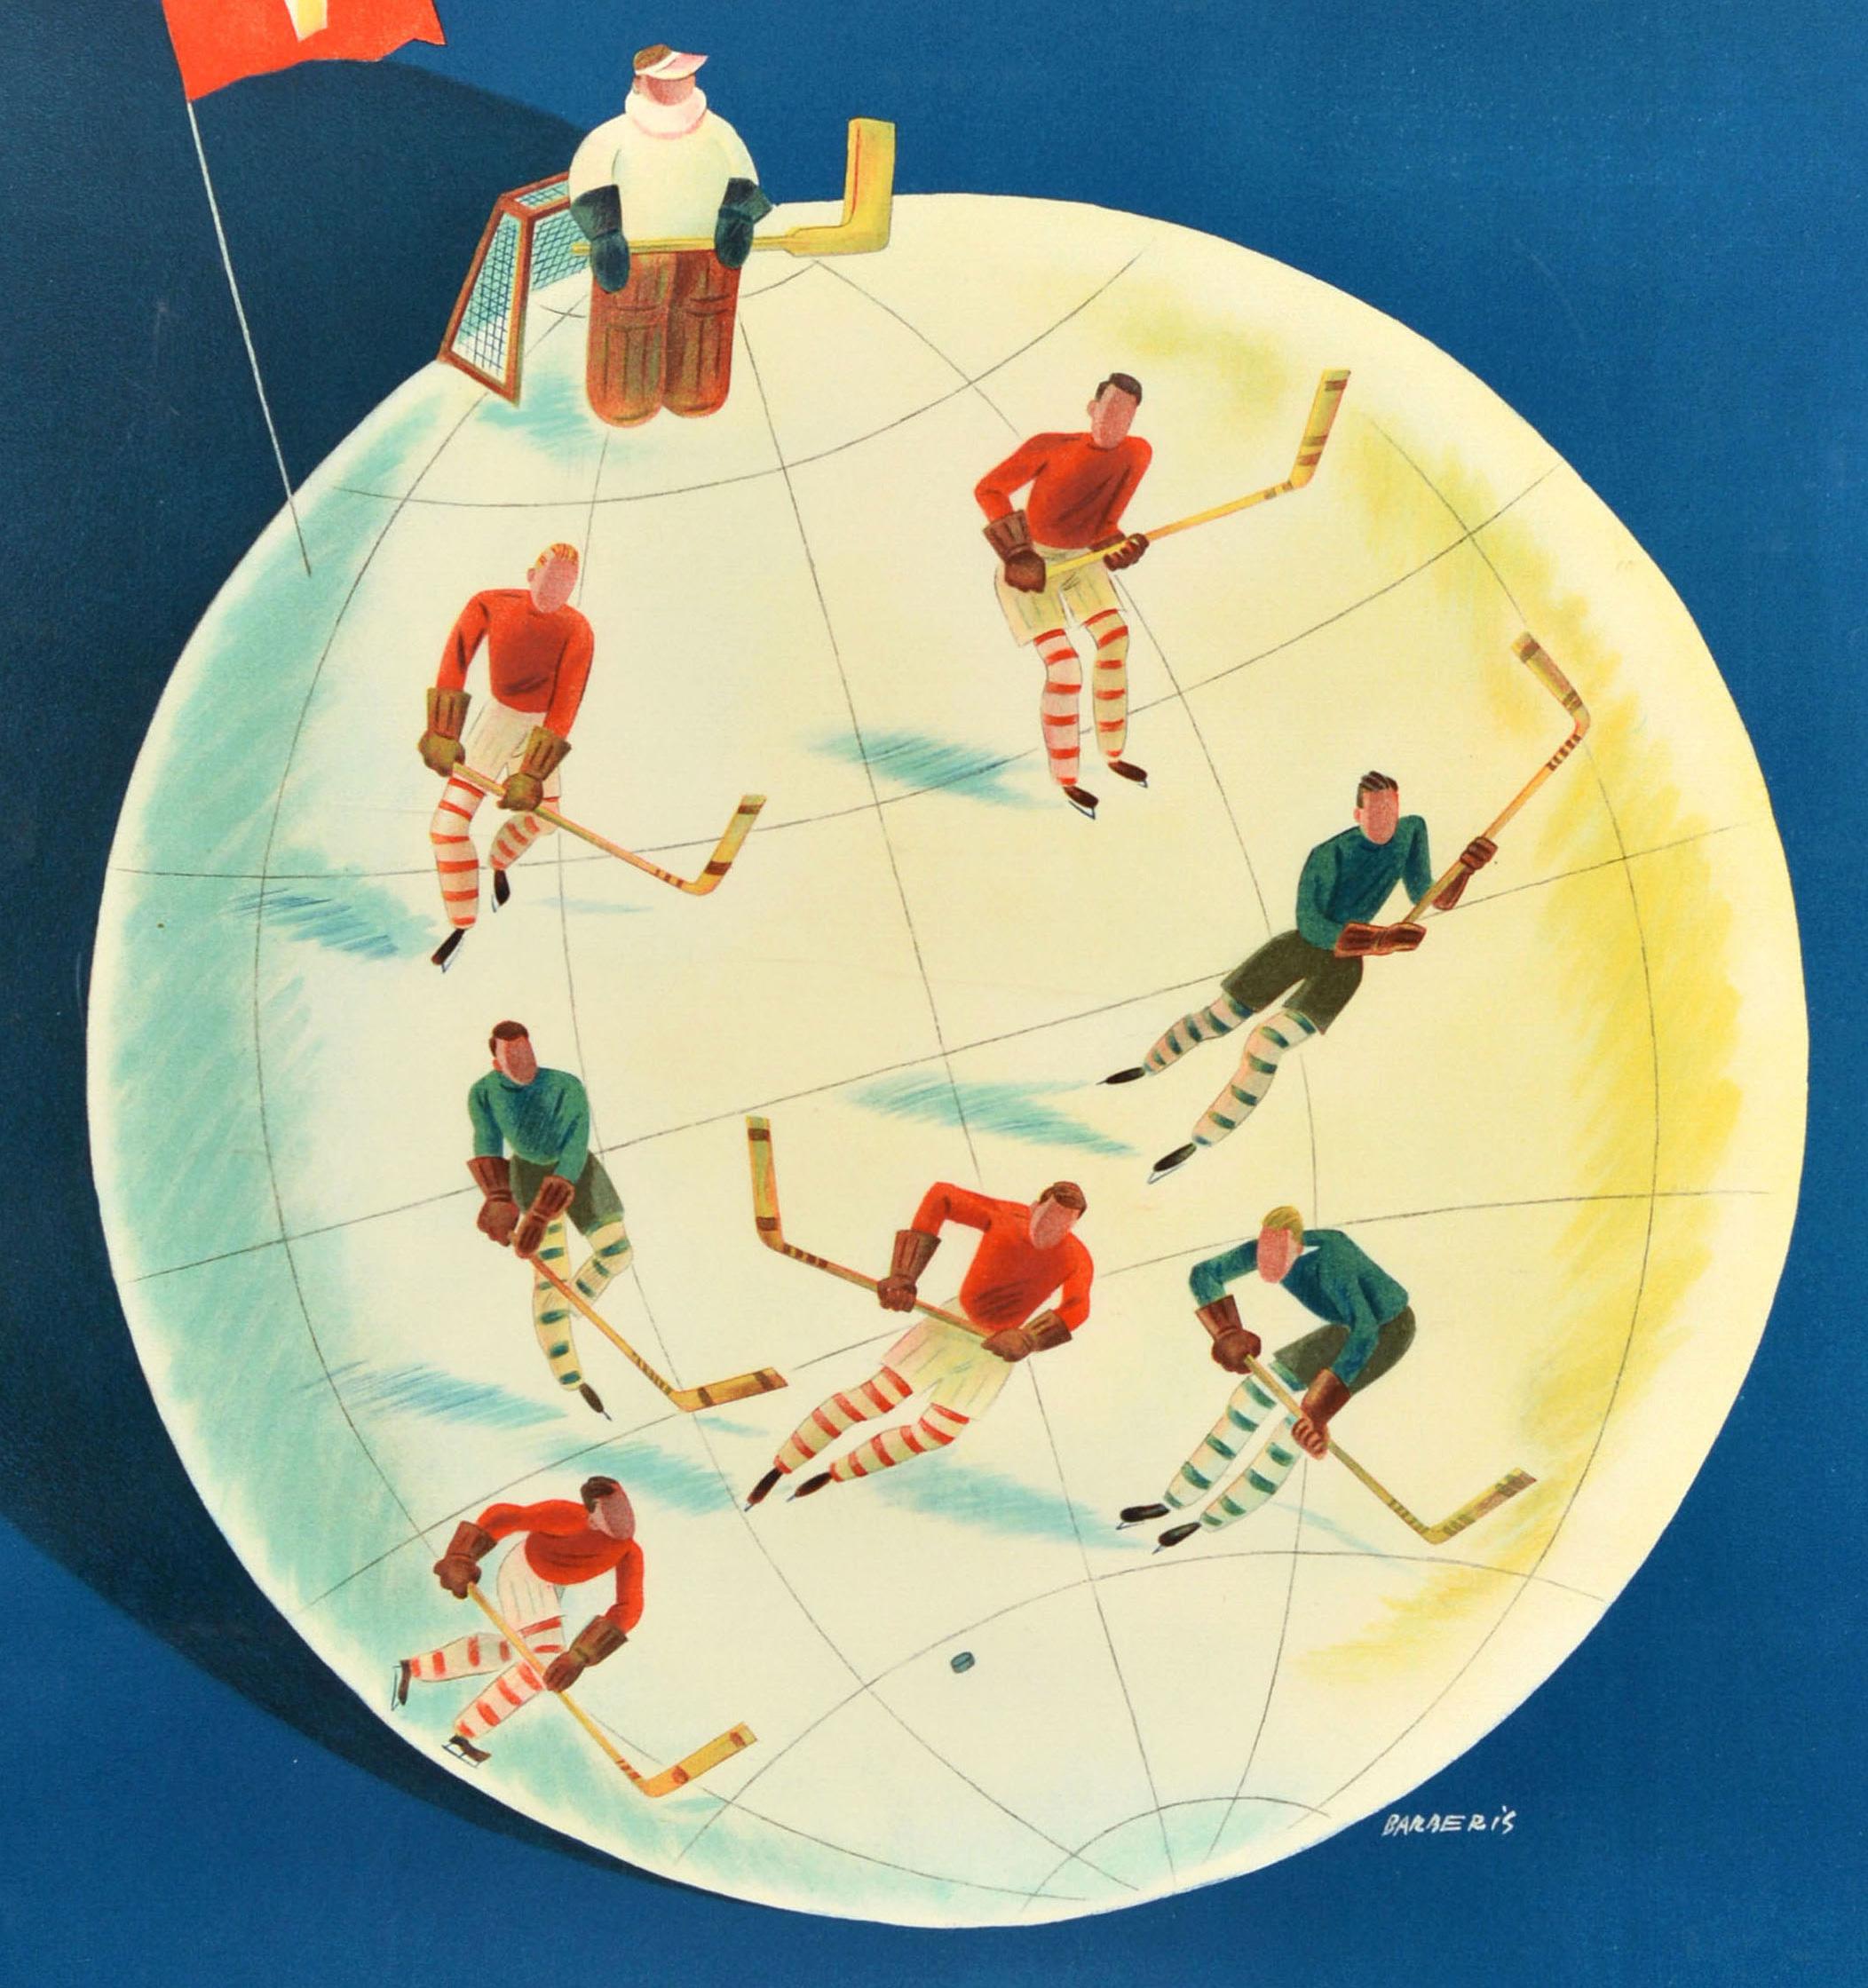 Original vintage sport poster for the Dolder Eisbahn Zurich ice skating rink open daily from 9-22:30 featuring a great design by the Swiss artist Franco Barberis (1905-1992) depicting ice hockey players on a globe of the world as the ice rink with a